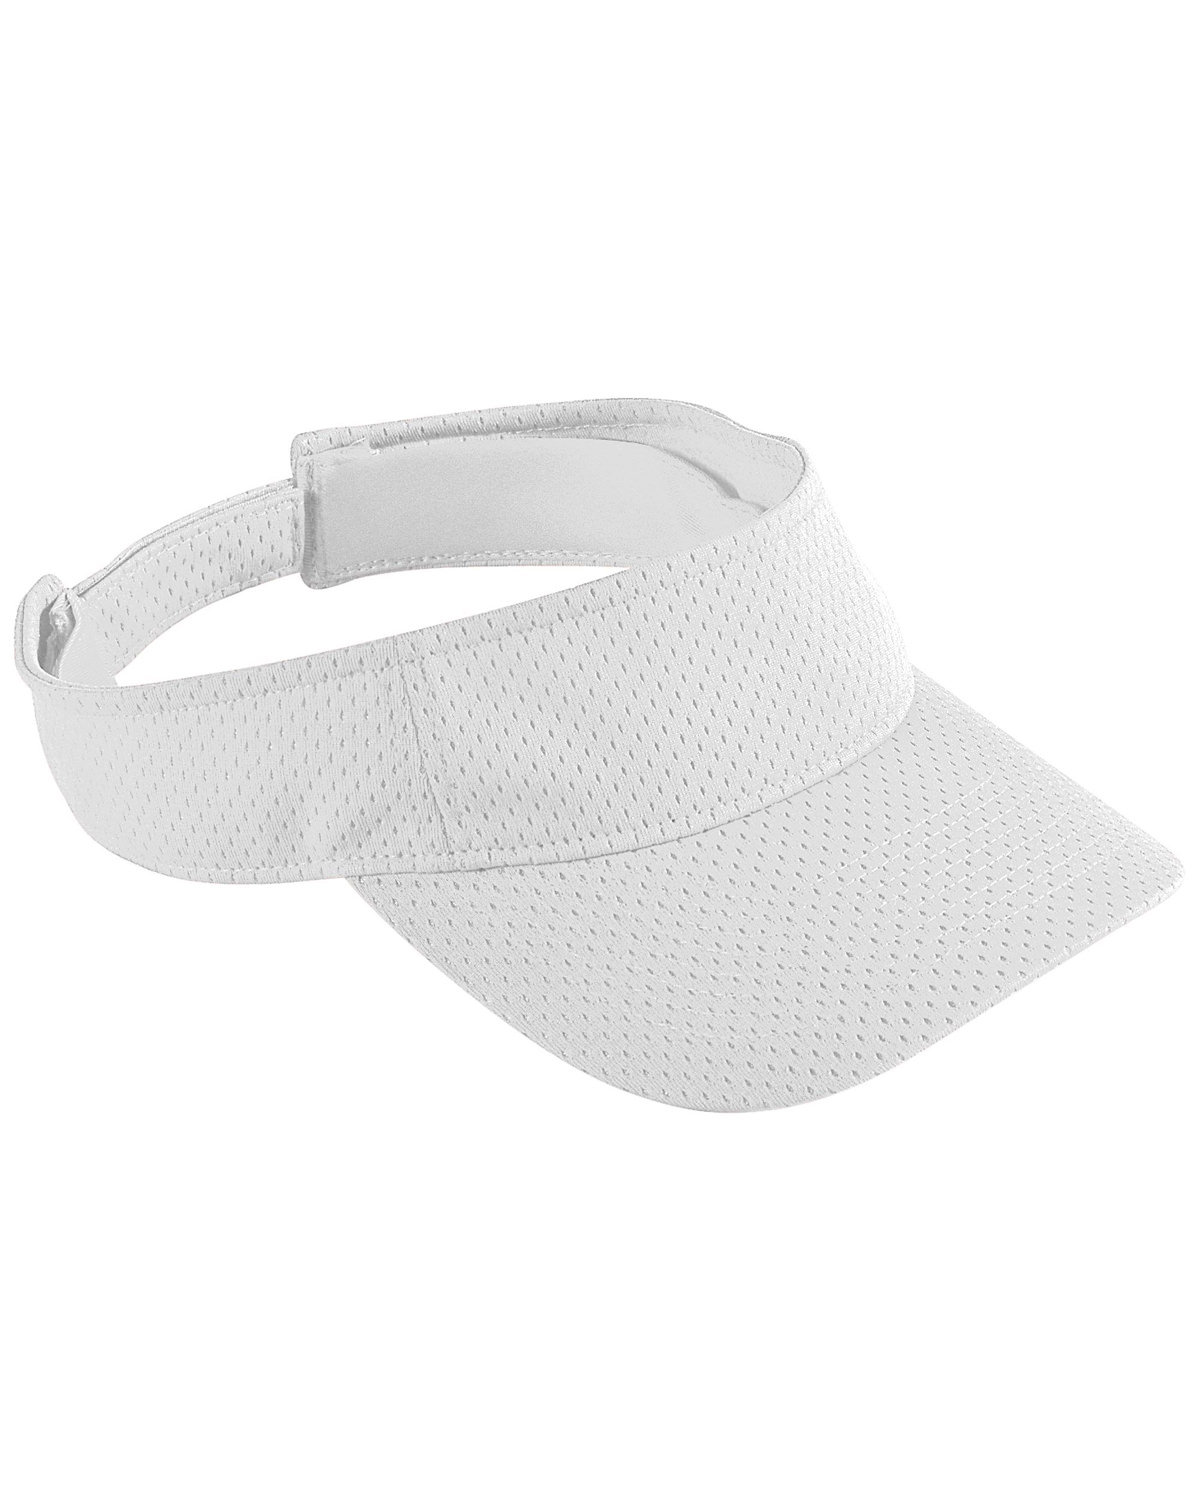 Front view of Athletic Mesh Visor